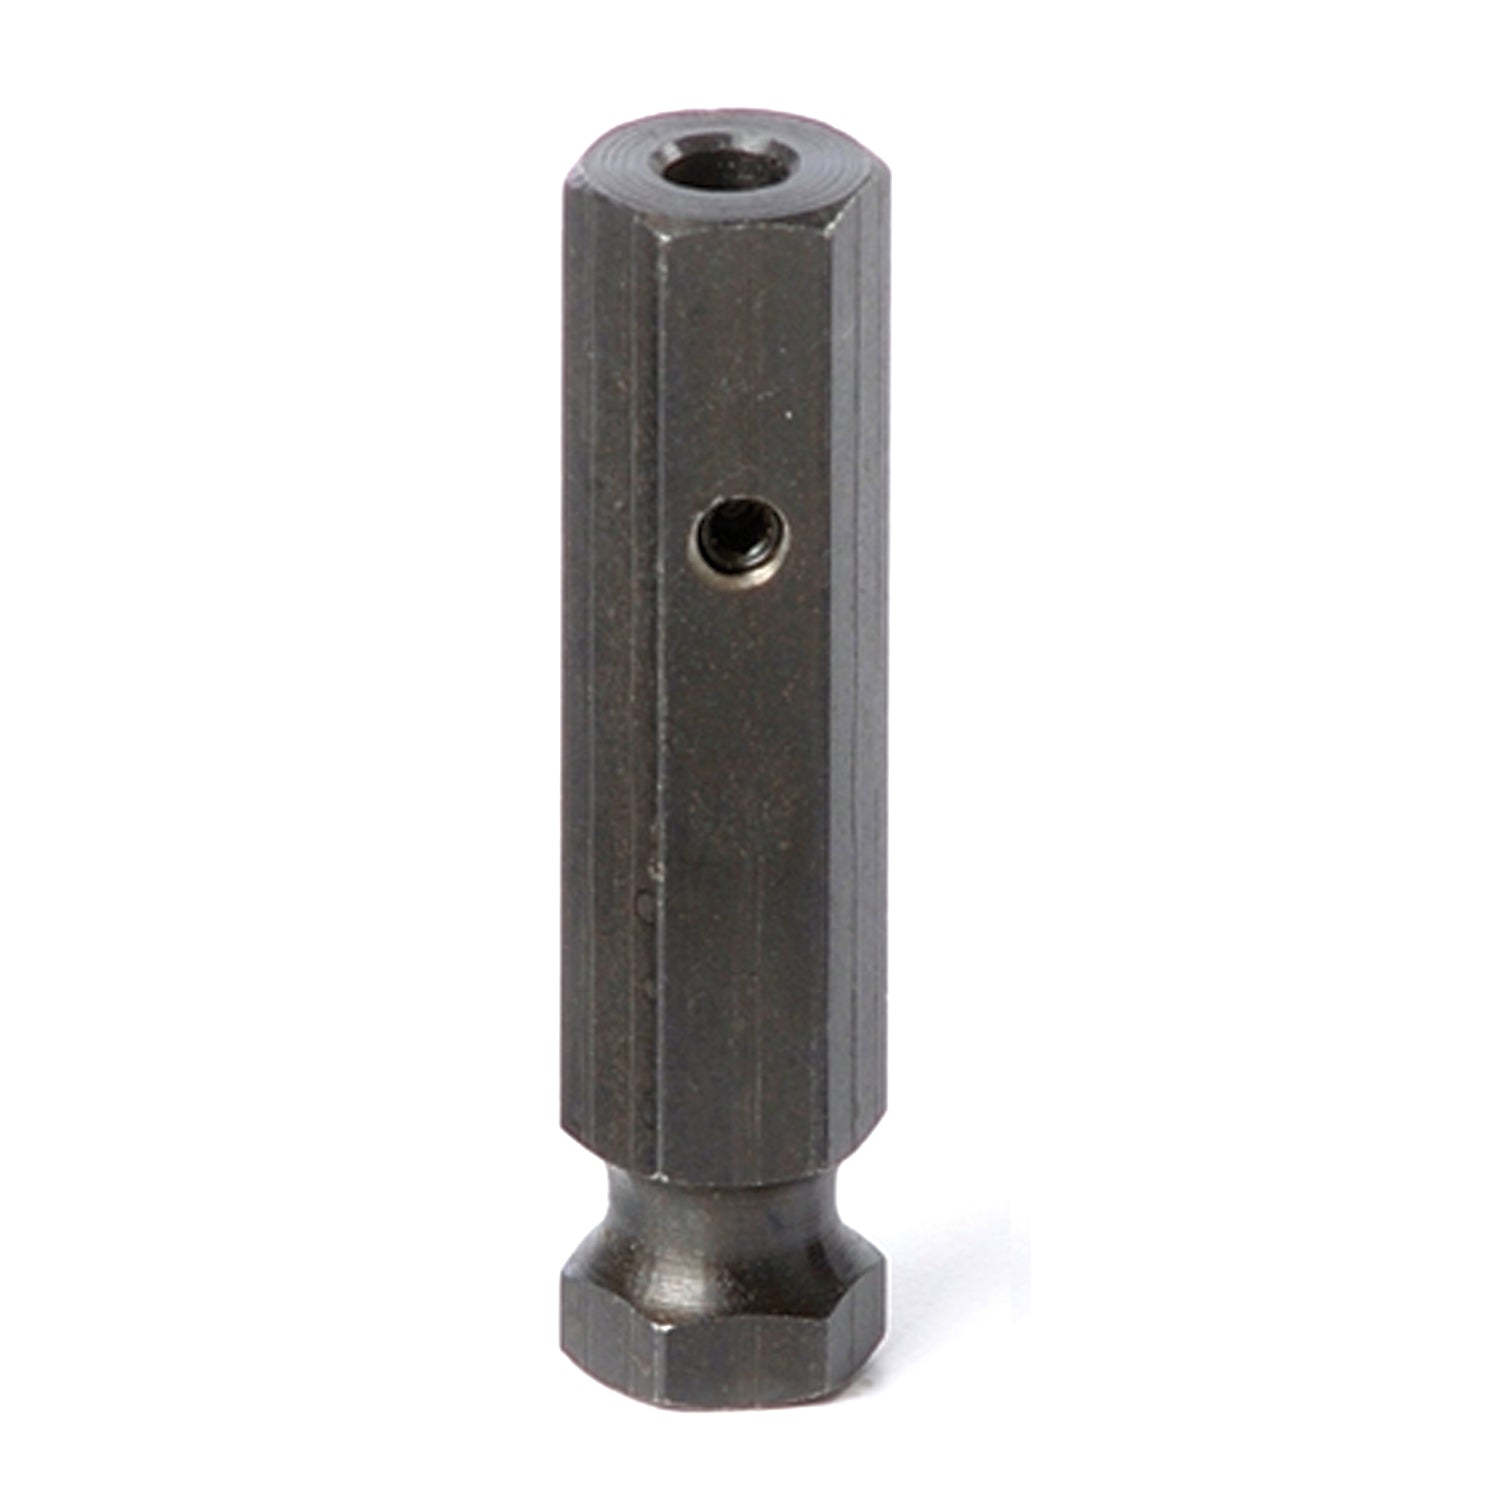 Xtra Seal Quick Change Adapter for 3/16" shank